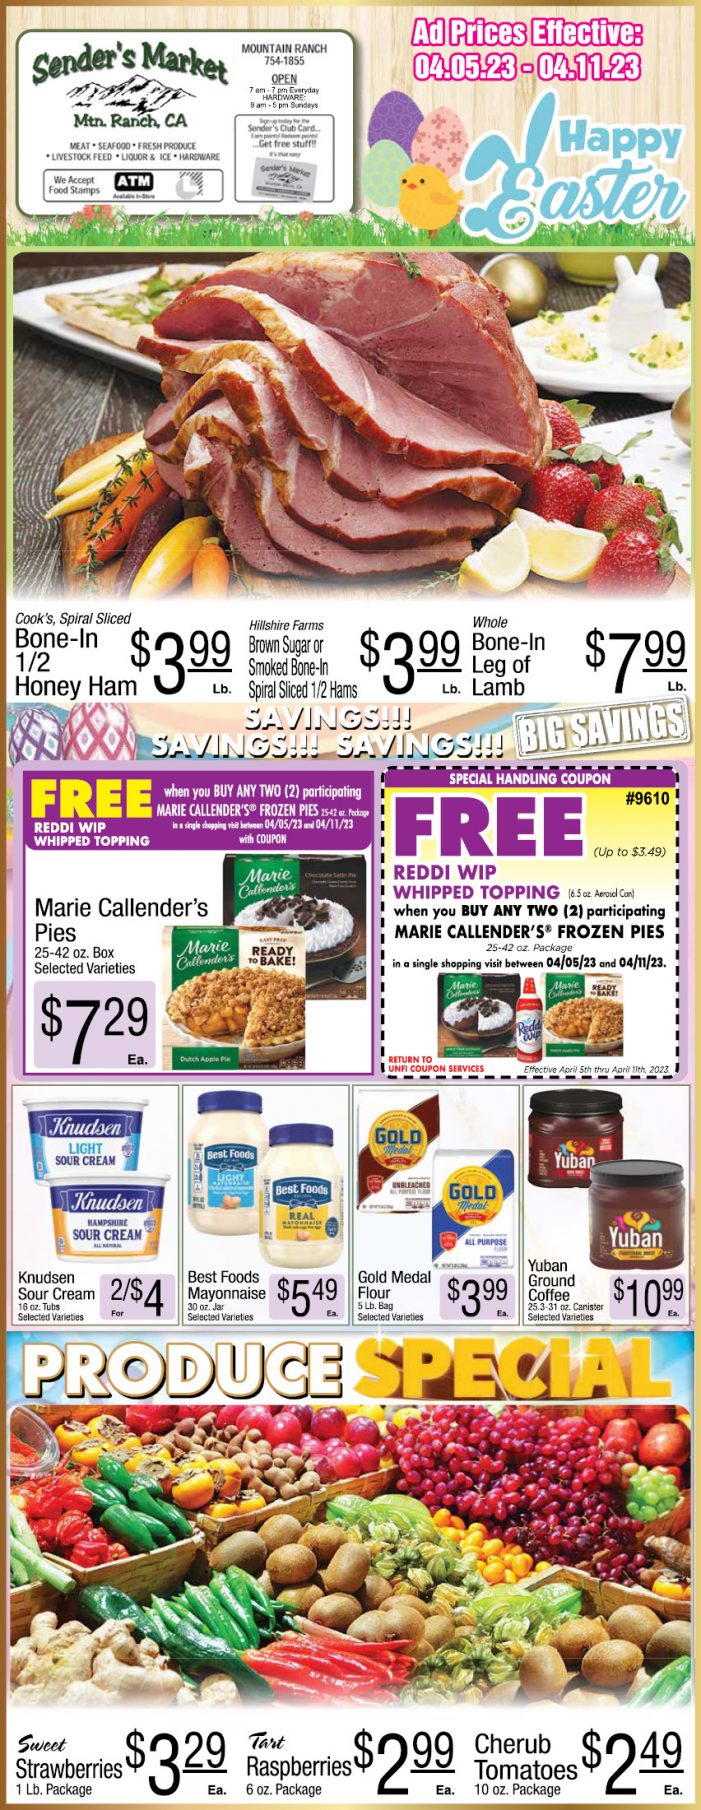 Sender’s Market Weekly Ad & Grocery Specials April 5 – 11th! Happy Easter!  Shop Local & Save!!